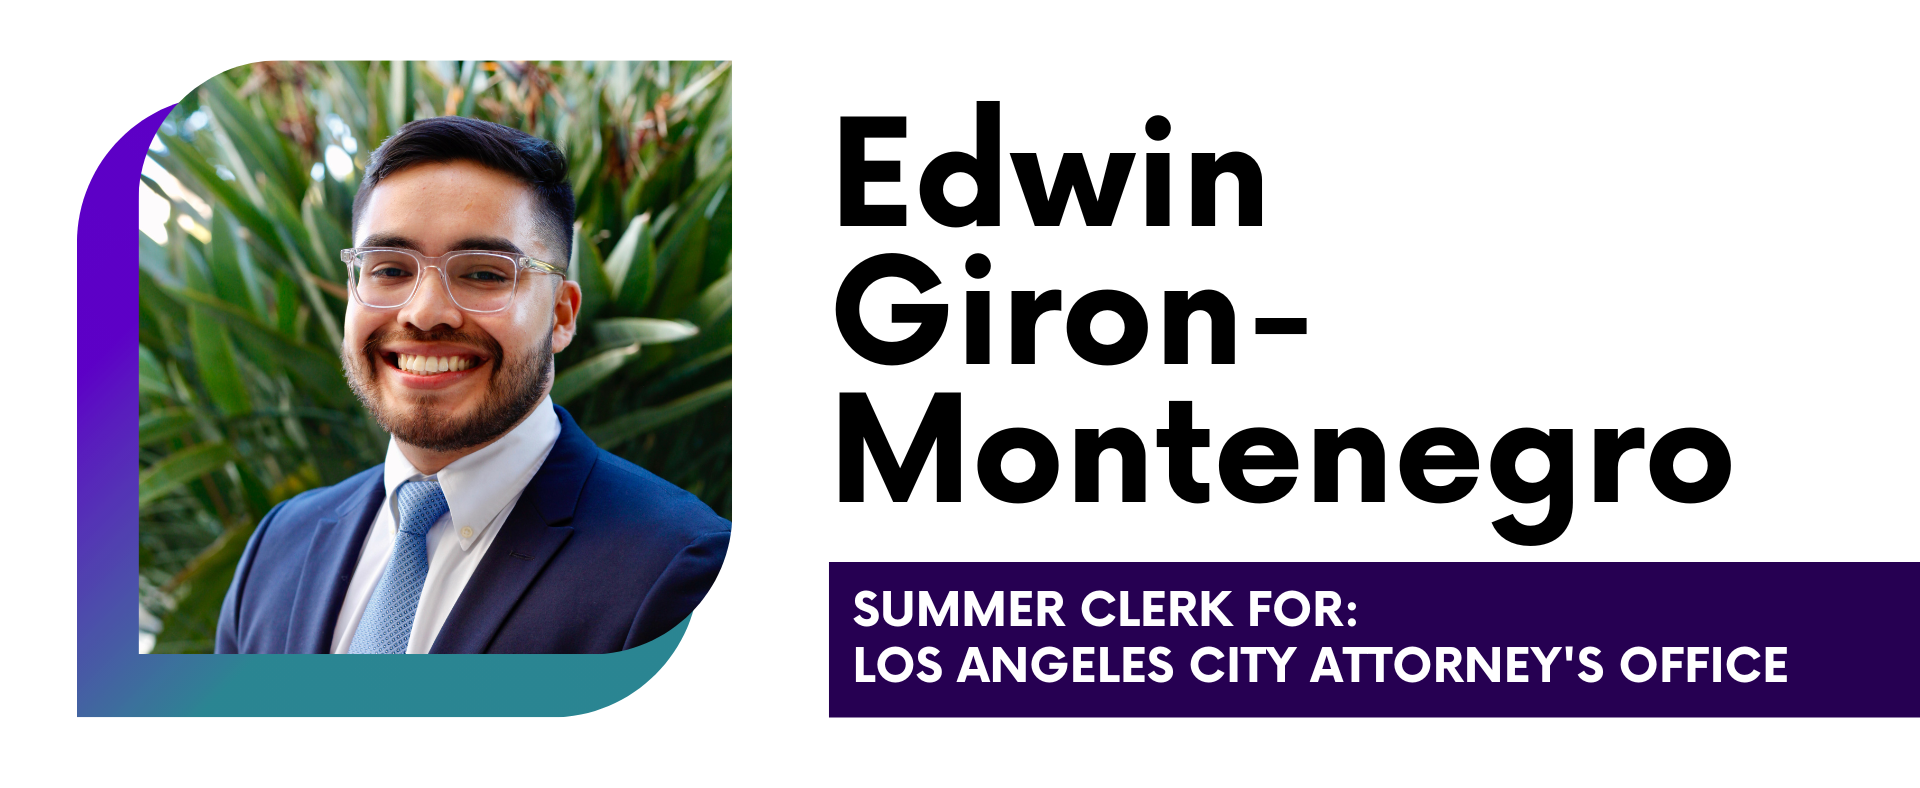 Edwin Giron-Montenegro Summer Clerk for Los Angeles City Attorney's Office